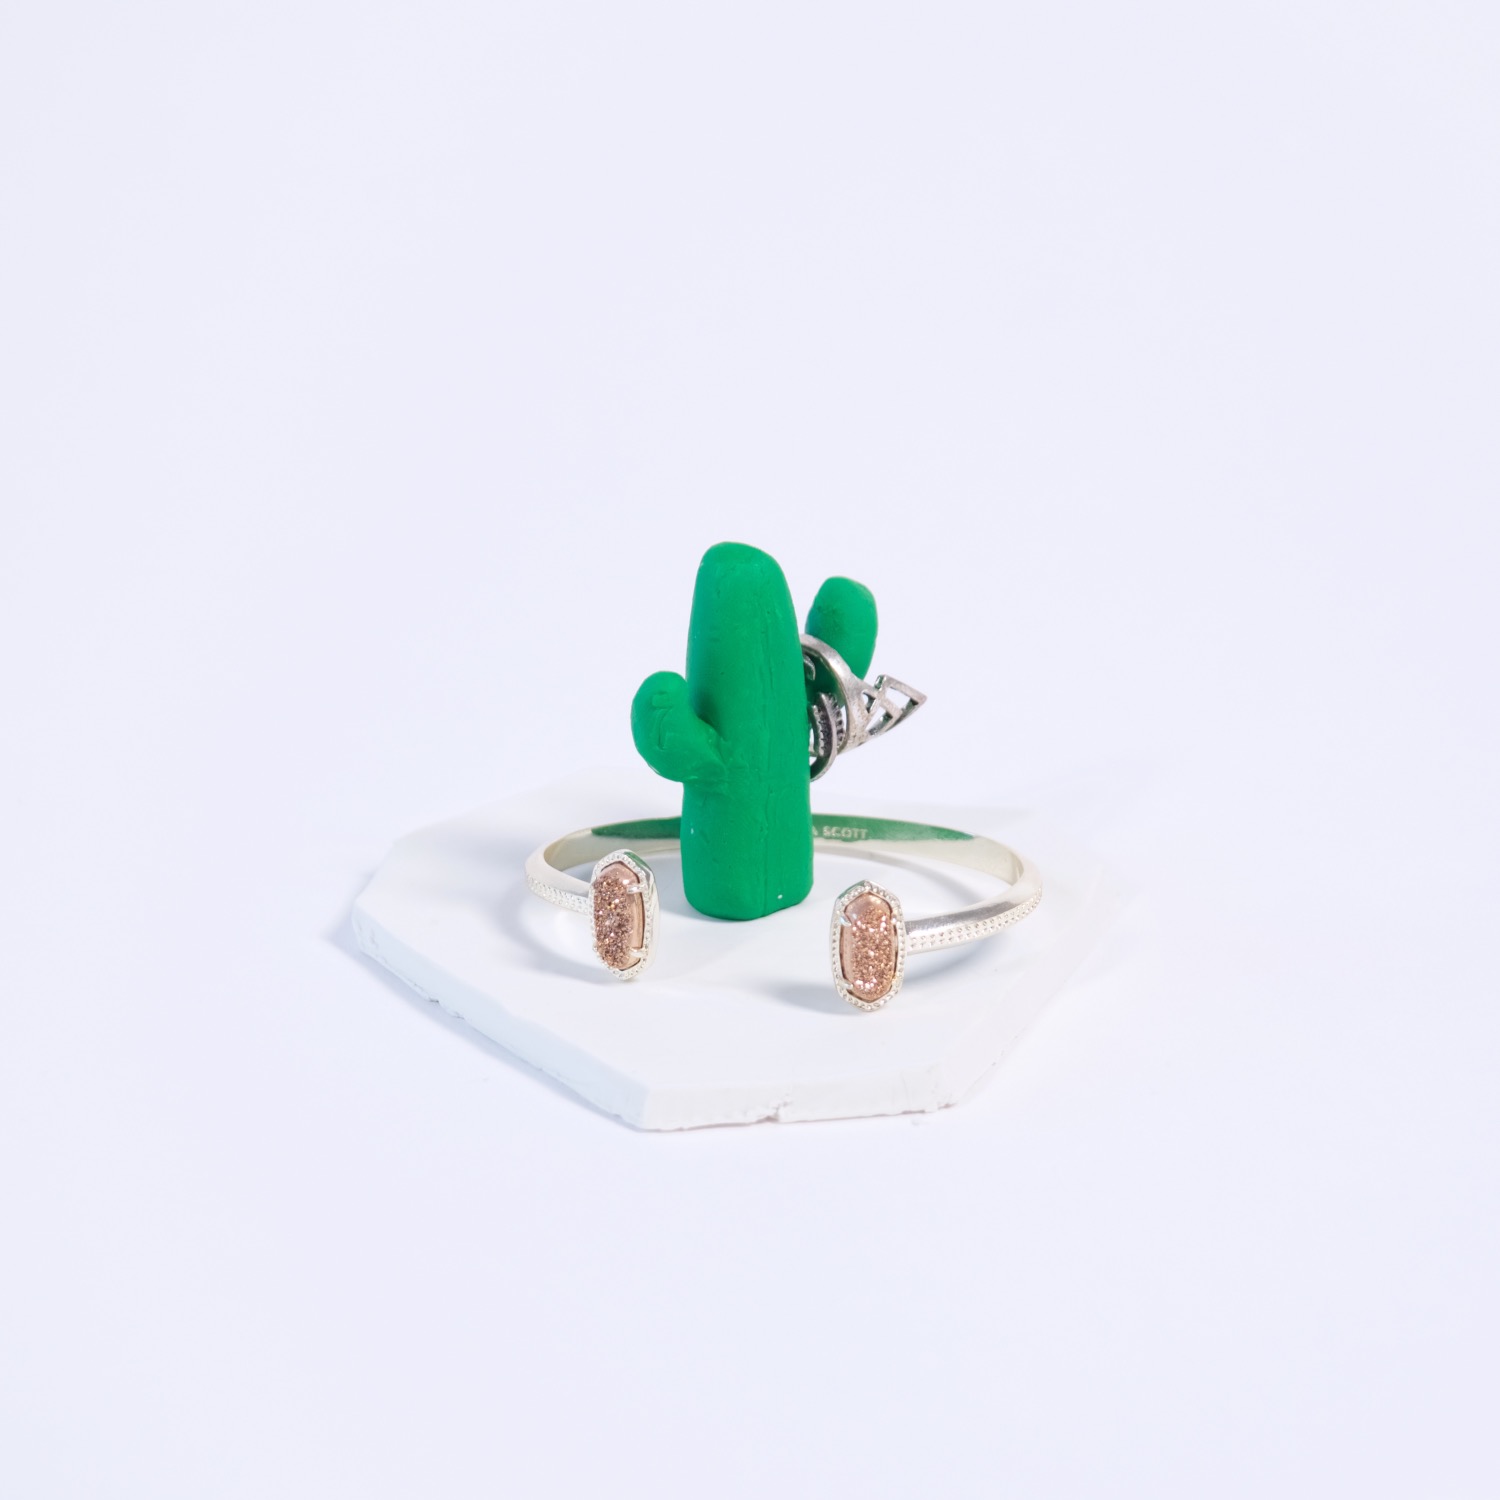 finished cactus trinket dish craft in style subscription box